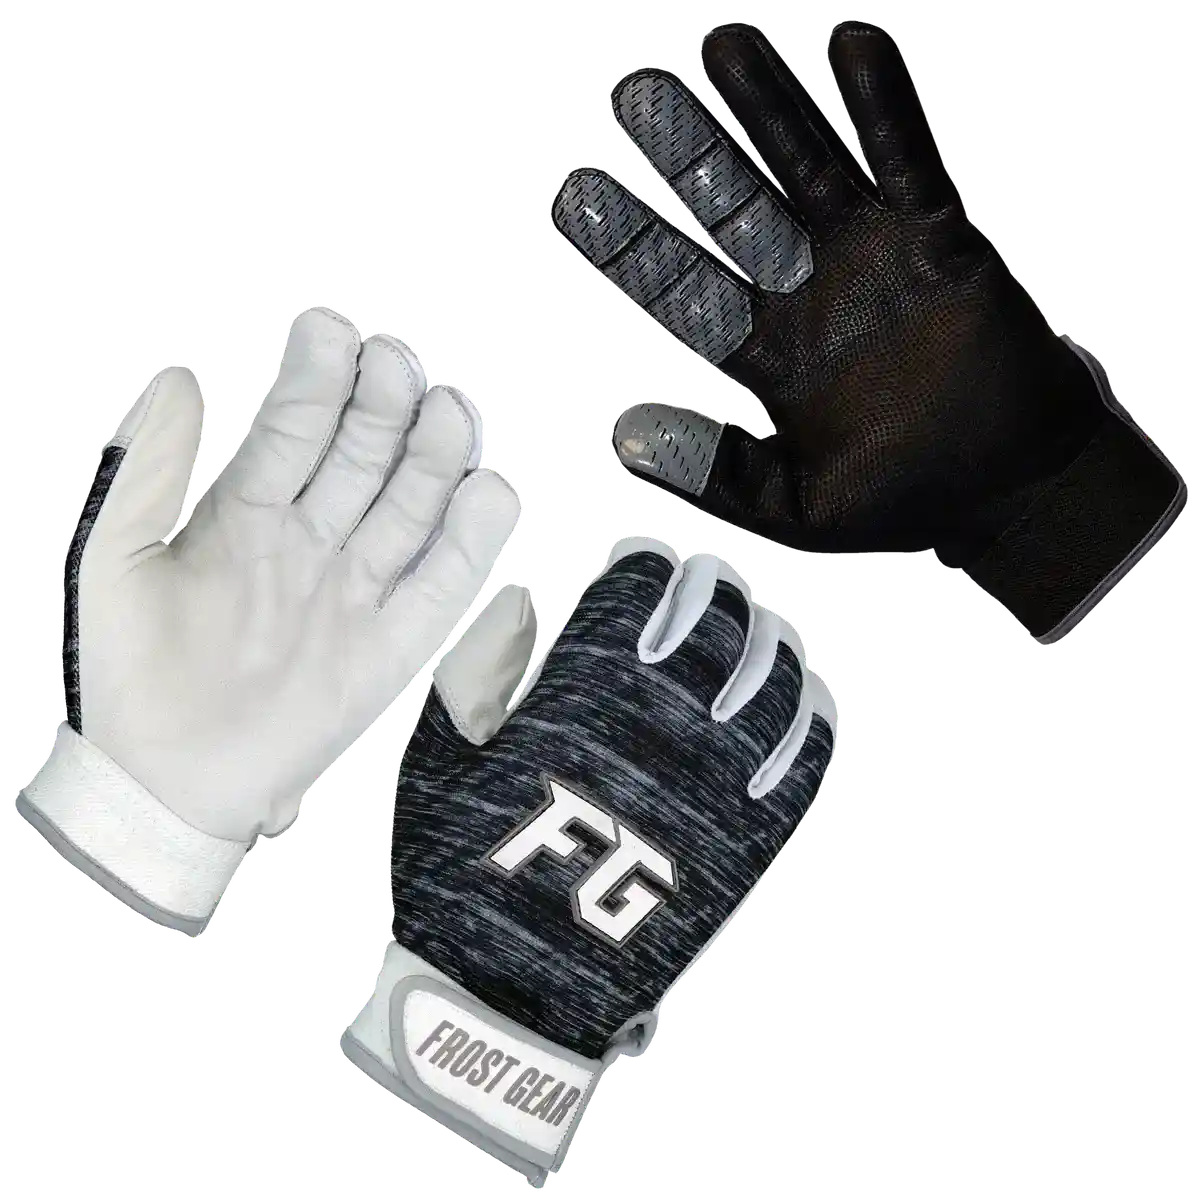 FG Package Deal: Baseball Throwing Glove &amp; Pair of Batting Gloves